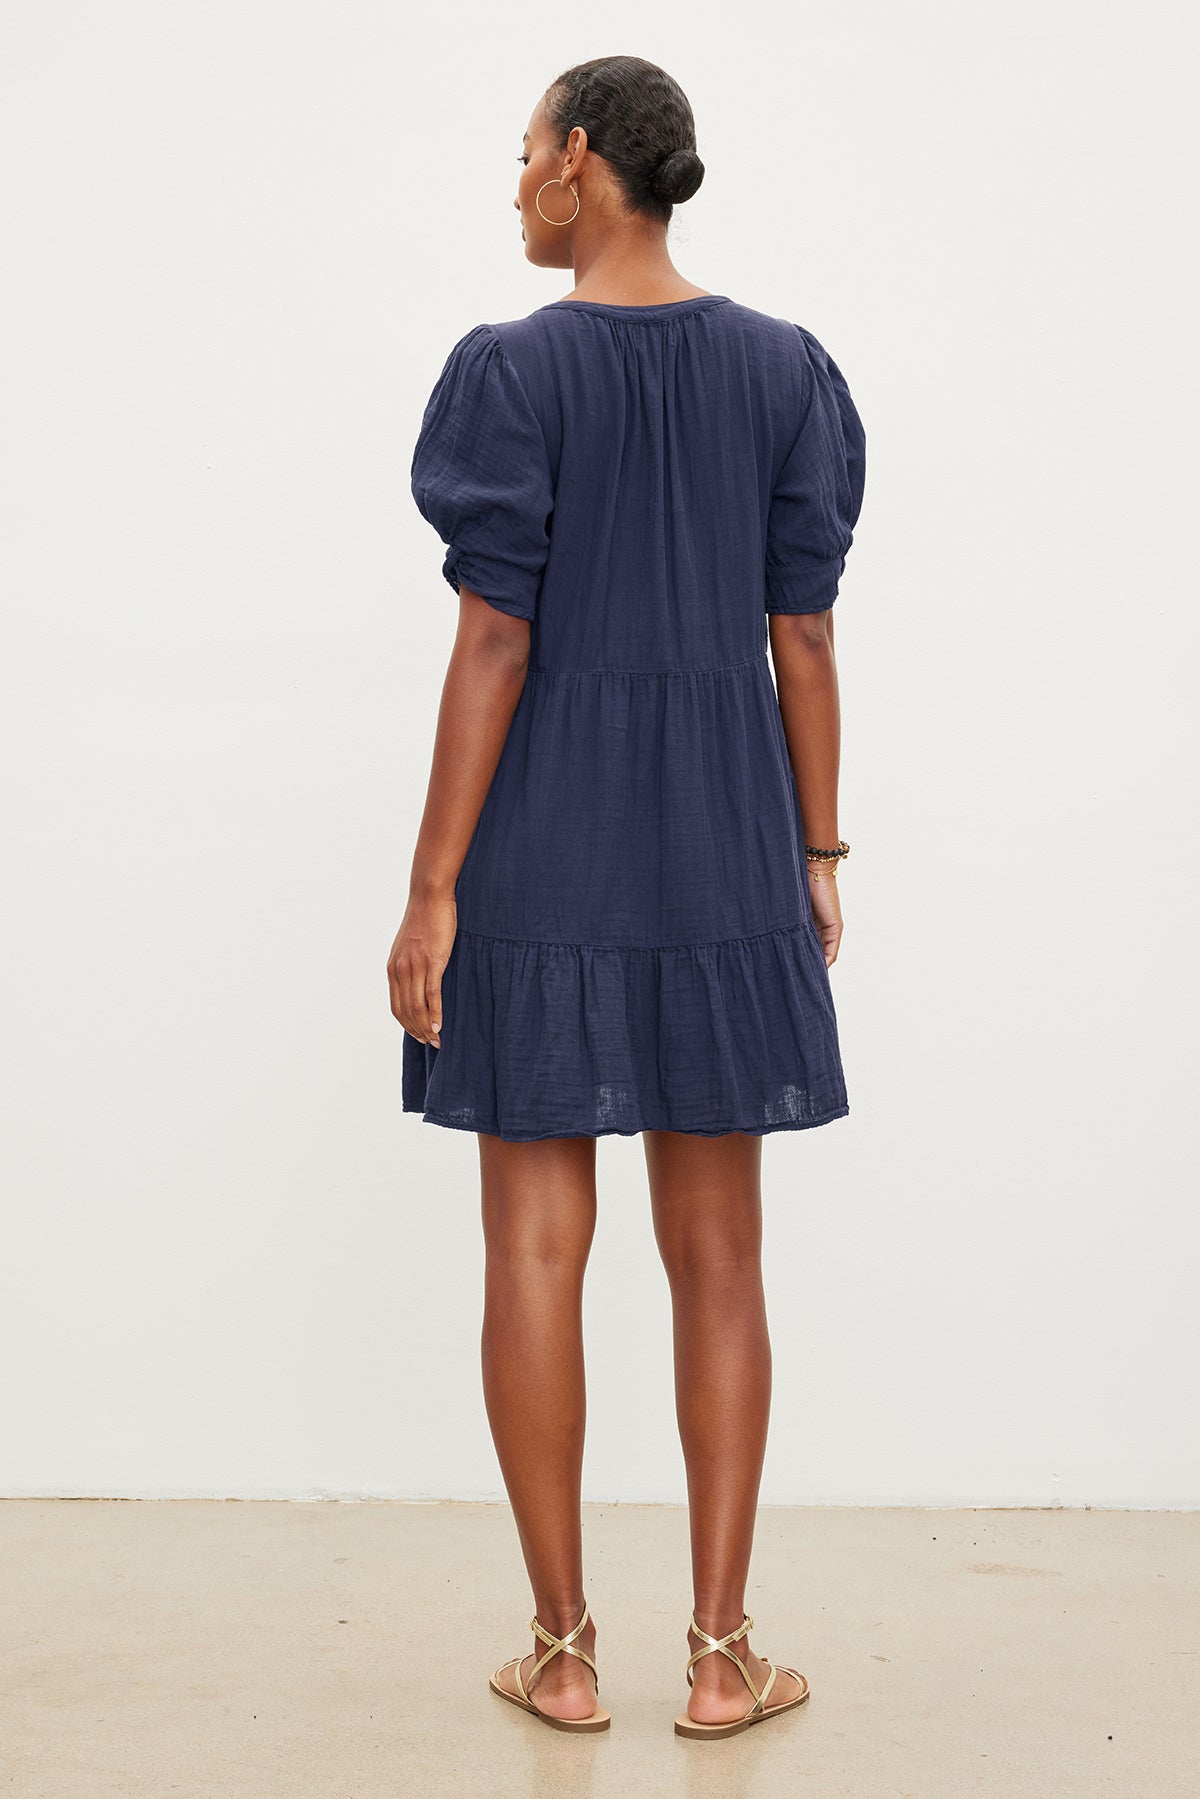   A person with short hair wearing a navy blue BELLA COTTON GAUZE DRESS by Velvet by Graham & Spencer and sandals is standing with their back to the camera against a plain white background. 